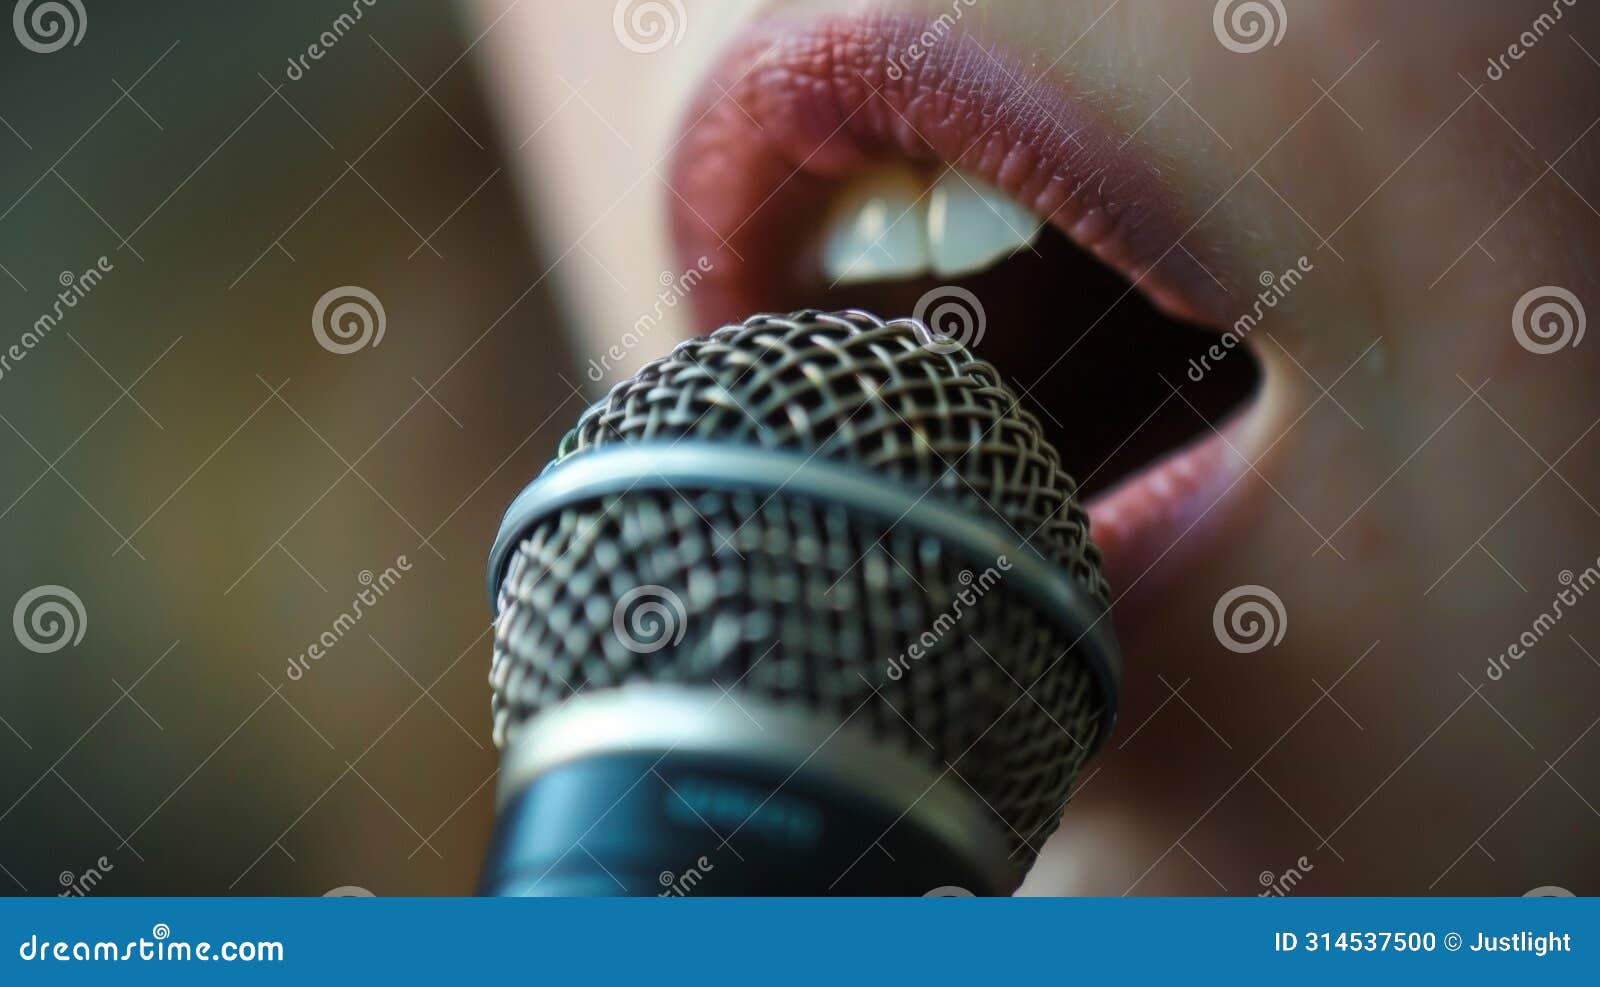 a closeup of a persons mouth with a microphone sped to face. as they speak and make different mouth movements the